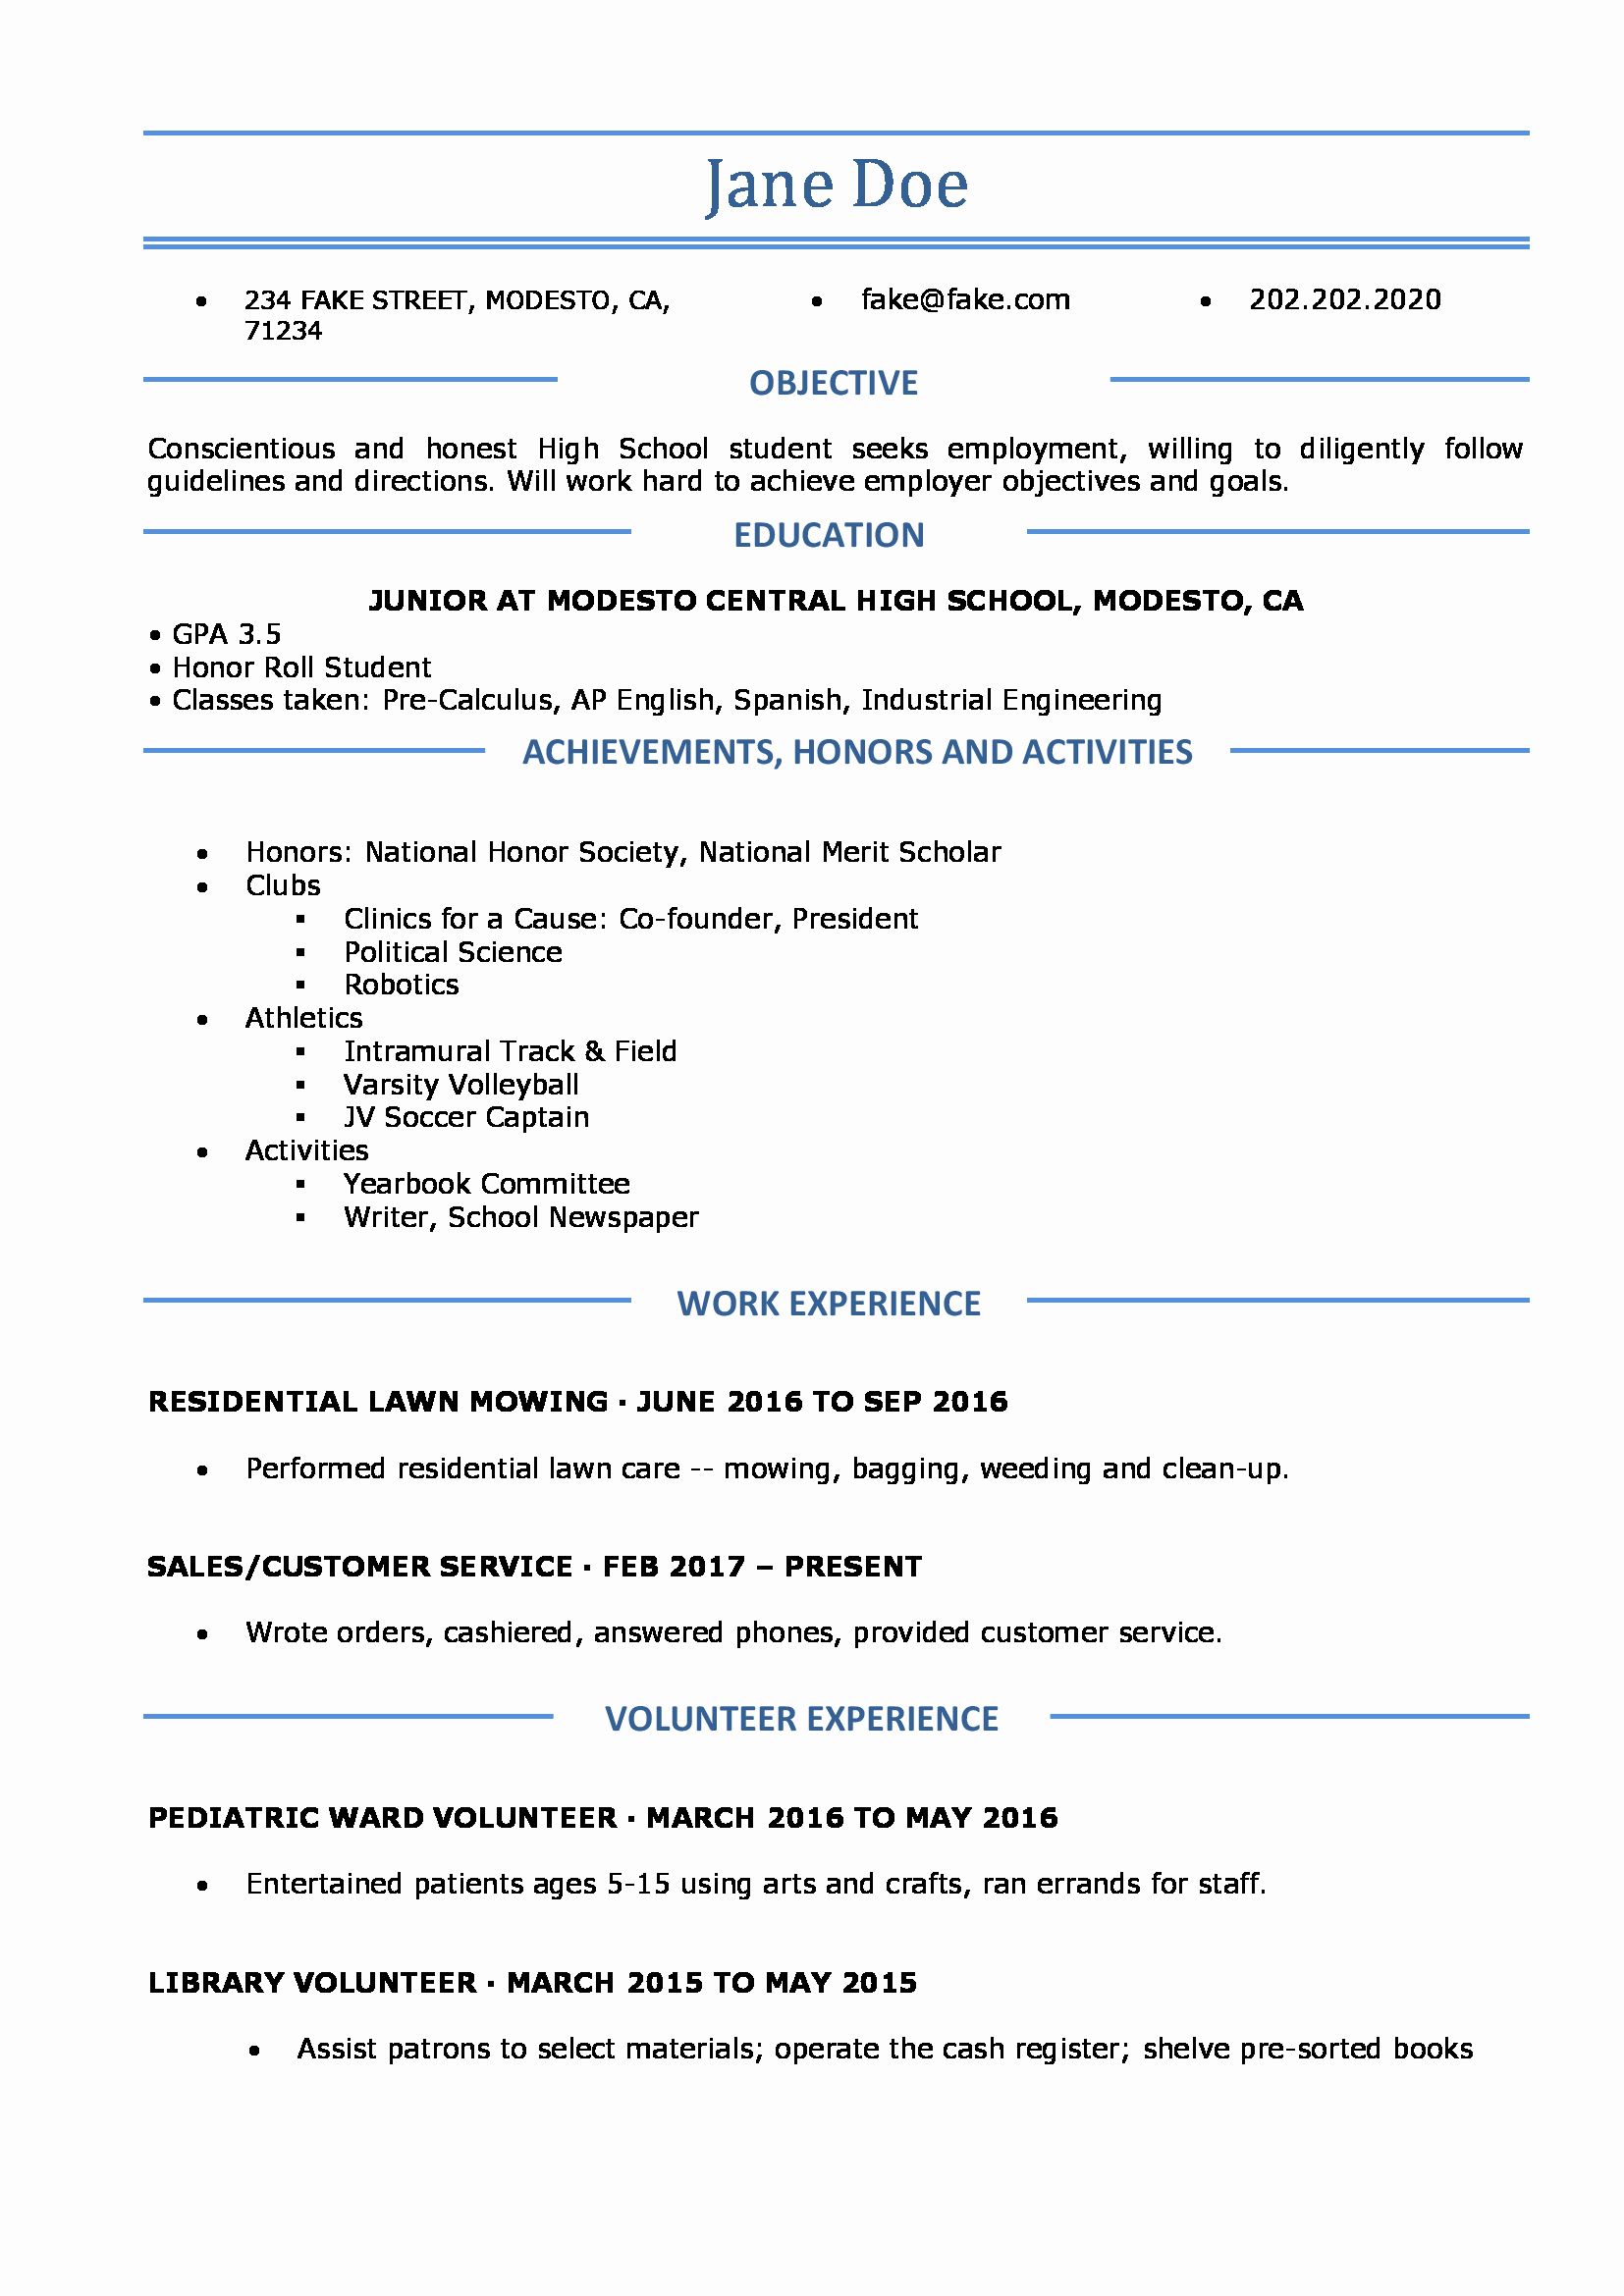 Resumes for High School Students Luxury High School Resume Resumes Perfect for High School Students